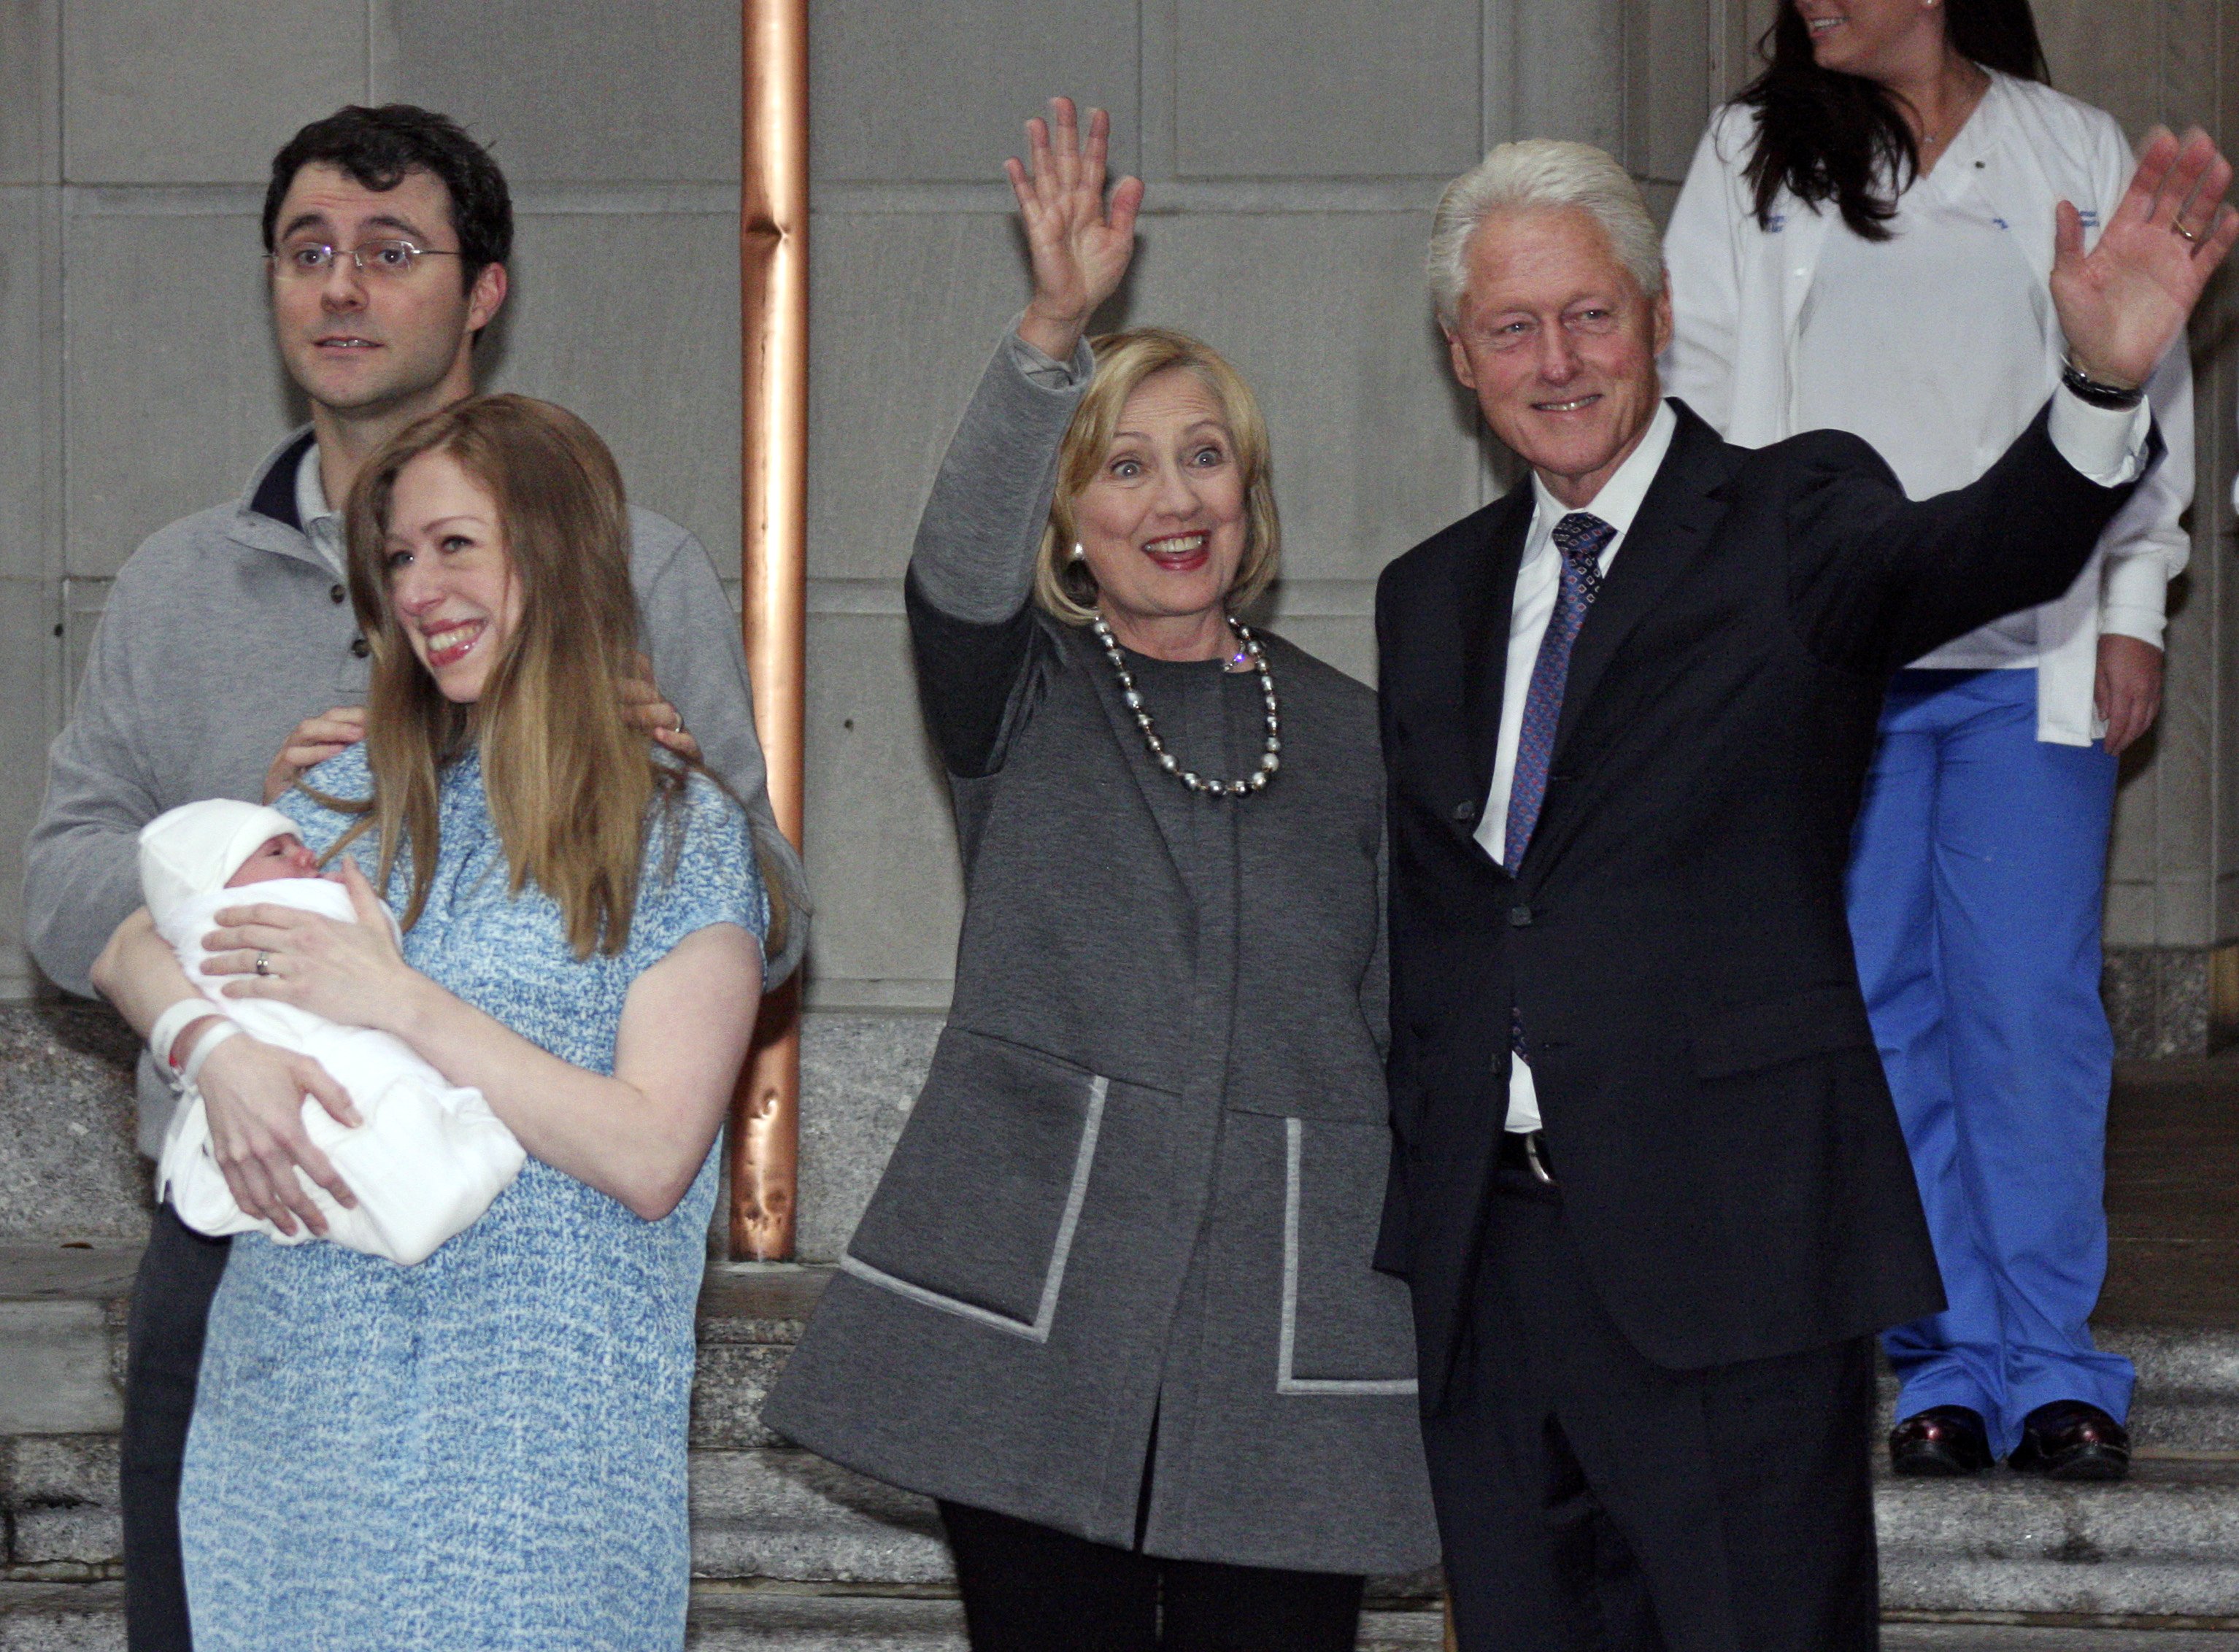 Former President Bill Clinton, right, and former Secretary of State Hillary Rodham Clinton, second from right, wave to the media as Marc Mezvinsky and Chelsea Clinton pose for photographers with their newborn baby, Charlotte, after the family leaves Manhattan's Lenox Hill hospital in New York City on Sept. 29, 2014. (William Regan—AP)